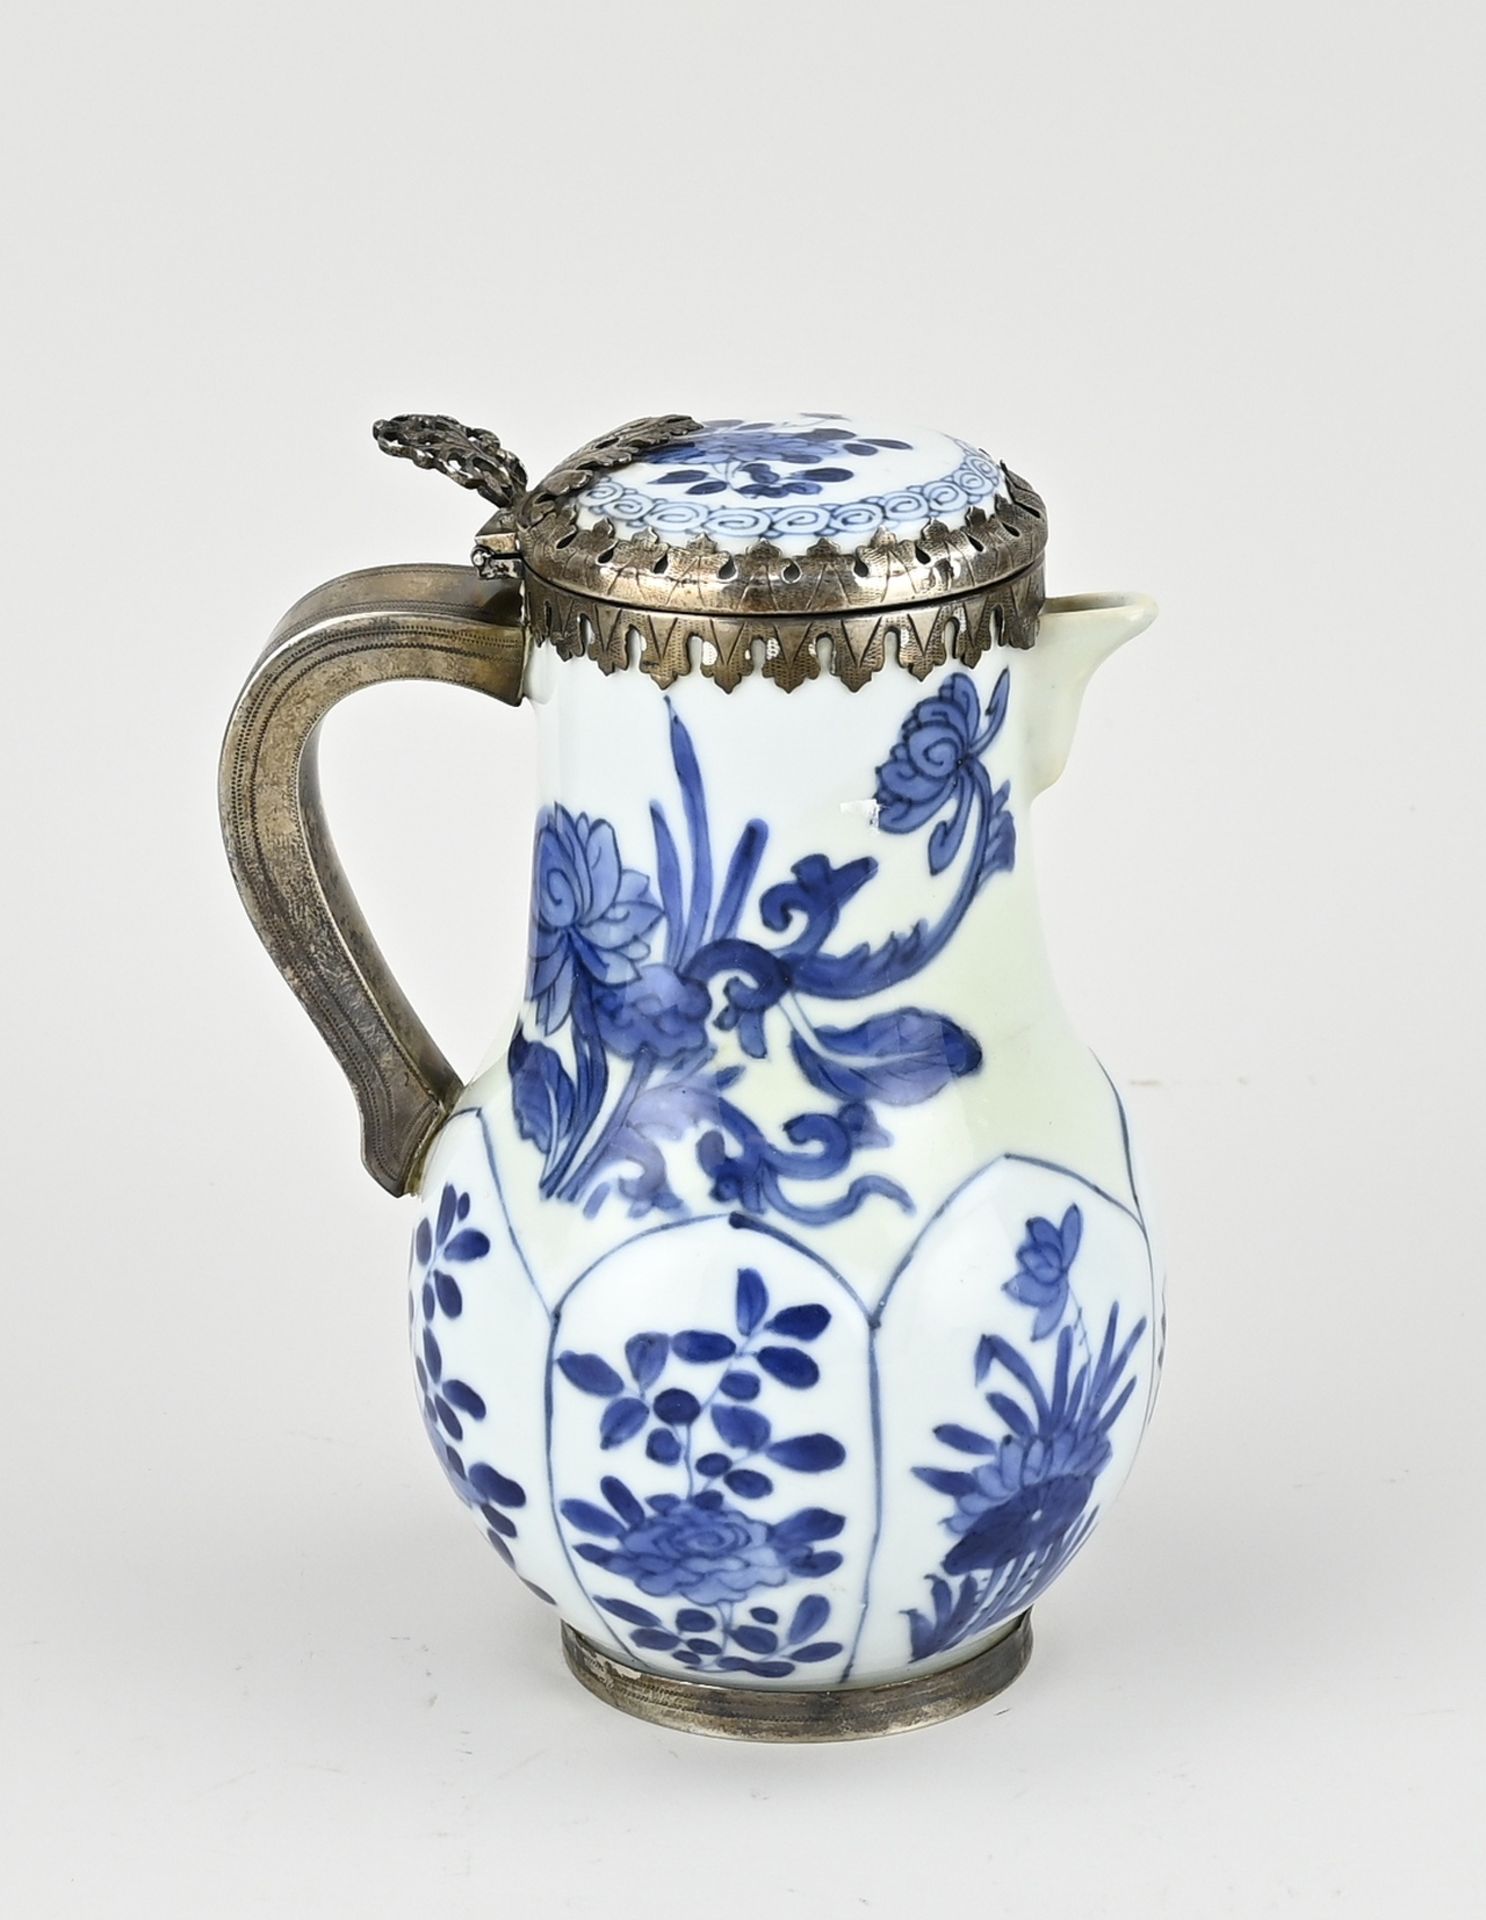 Chinese jug with silverware, H 15 cm. - Image 2 of 3